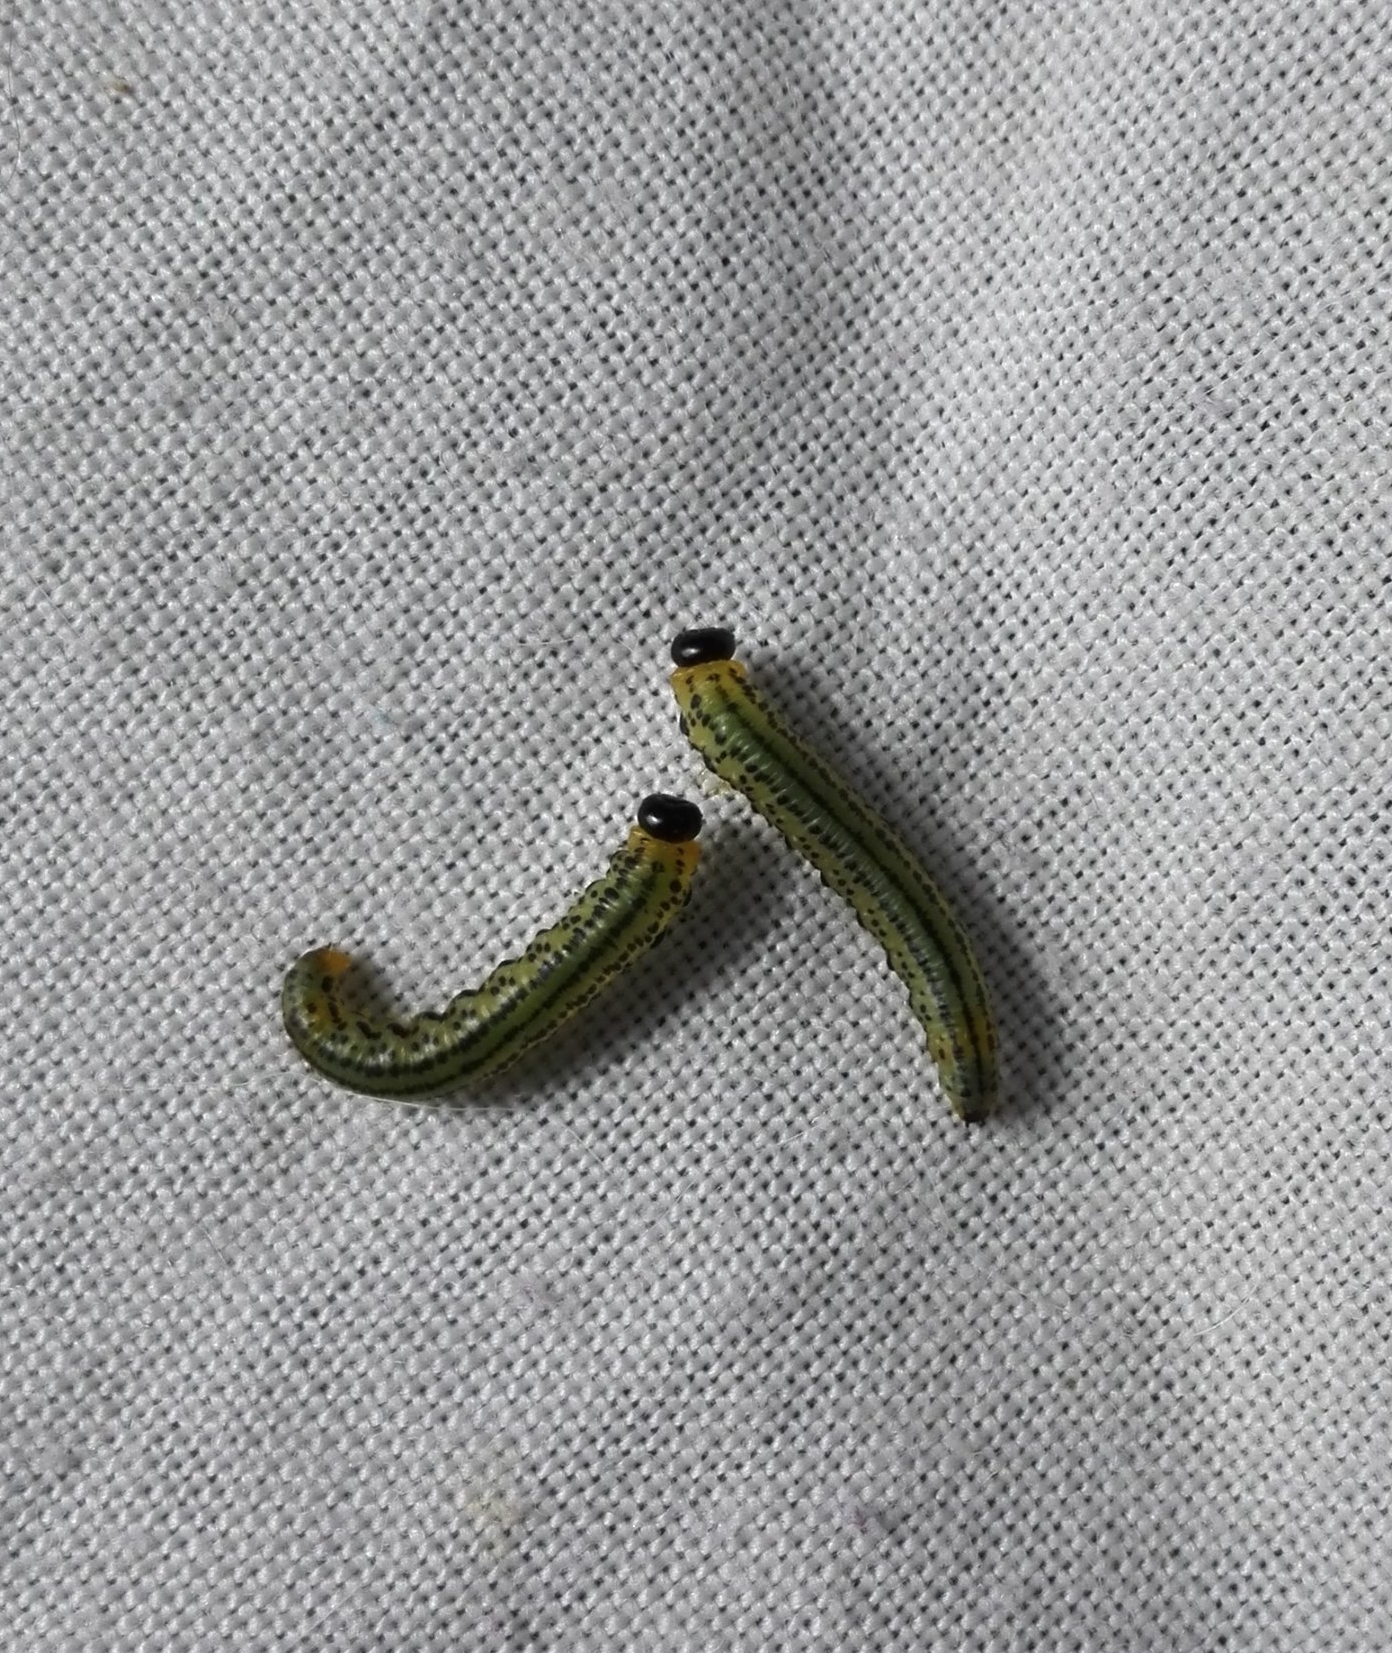 #159 Lesser Willow Sawfly larvae